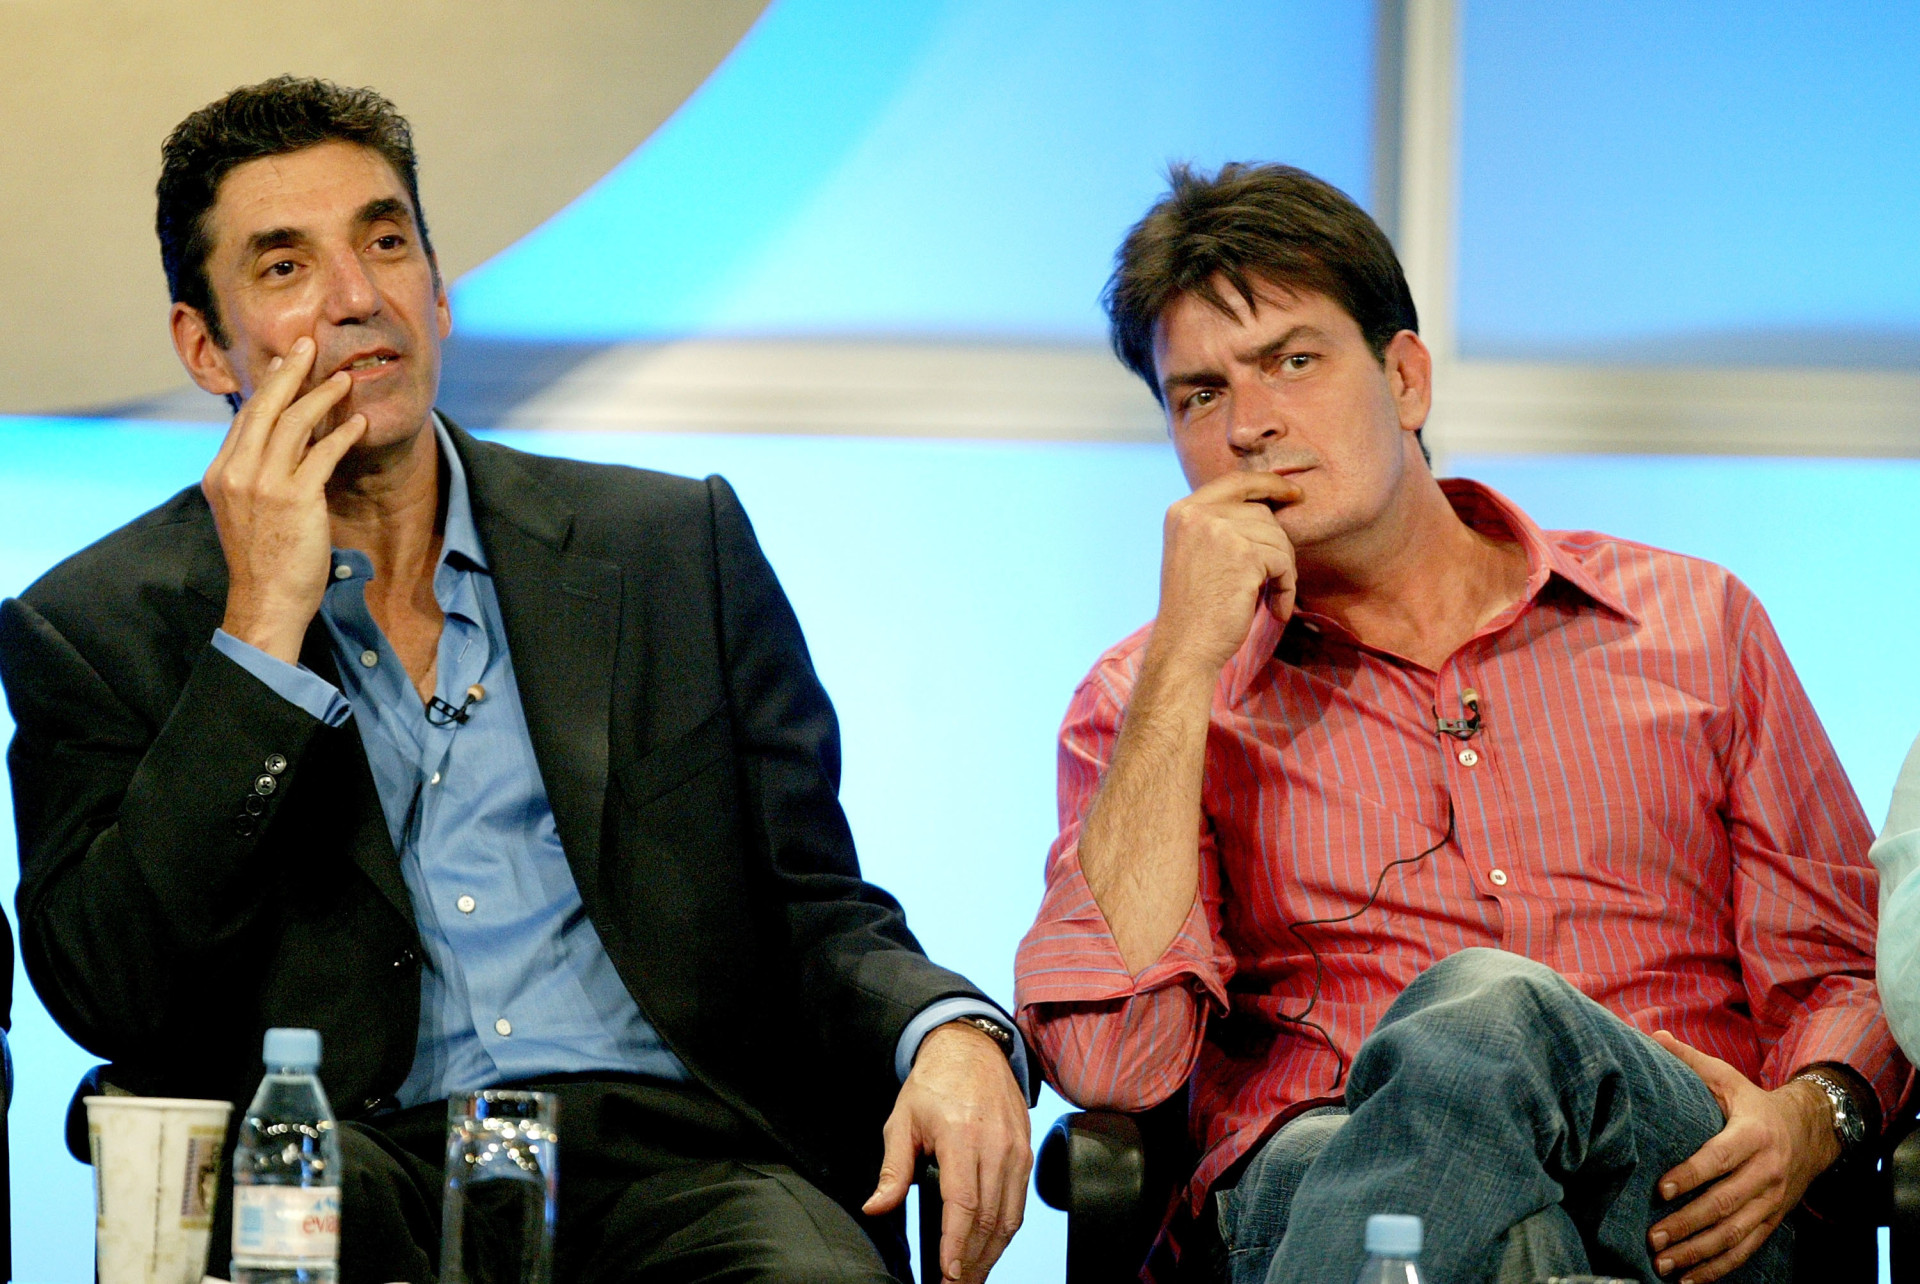 <p>Lorre, the mastermind behind 'Two and a Half Men' featuring Charlie Sheen, faced a public conflict after Sheen labeled him a narcissist during an interview on Kiis 1065. Consequently, Sheen's character was ultimately written off the show.</p><p><a href="https://www.msn.com/en-us/community/channel/vid-7xx8mnucu55yw63we9va2gwr7uihbxwc68fxqp25x6tg4ftibpra?cvid=94631541bc0f4f89bfd59158d696ad7e">Follow us and access great exclusive content every day</a></p>